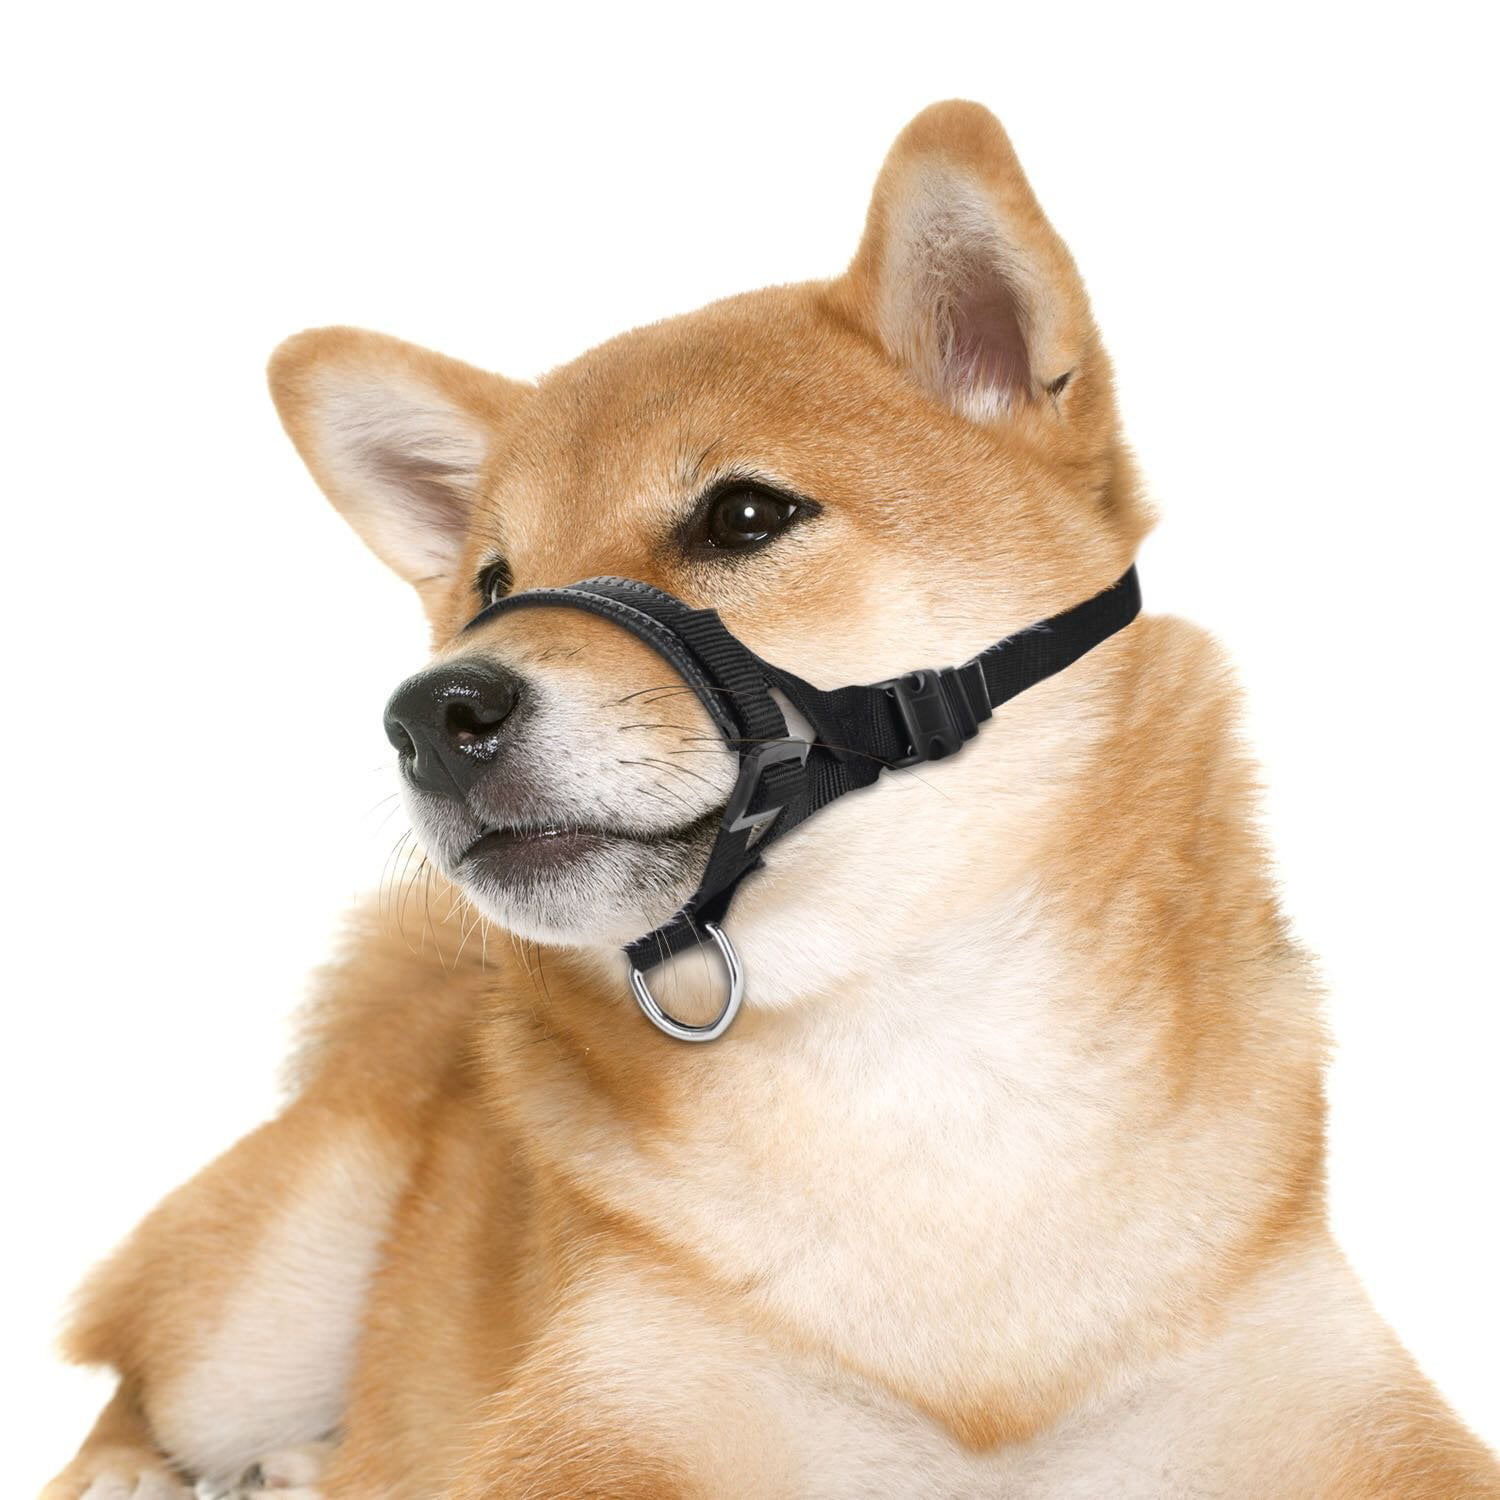 UPDOG Dog Muzzle Nylon Adjustable for Small Medium or Large Dogs Barking and Chewing Prevent for Biting